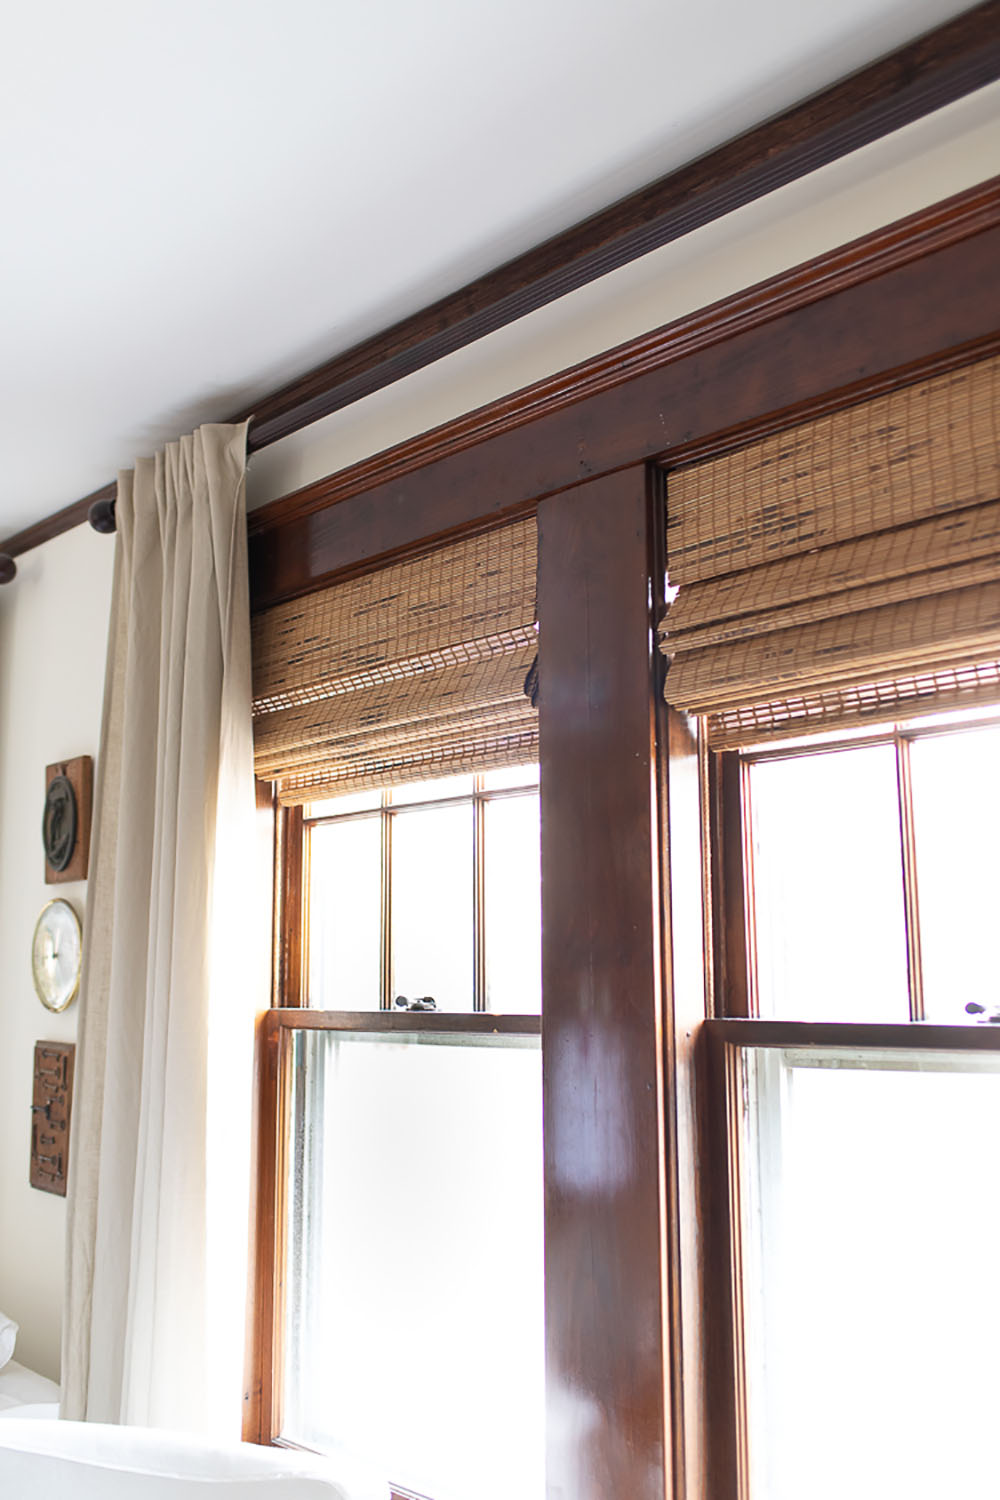 A pair of woven roman shades on windows with dark woodwork.